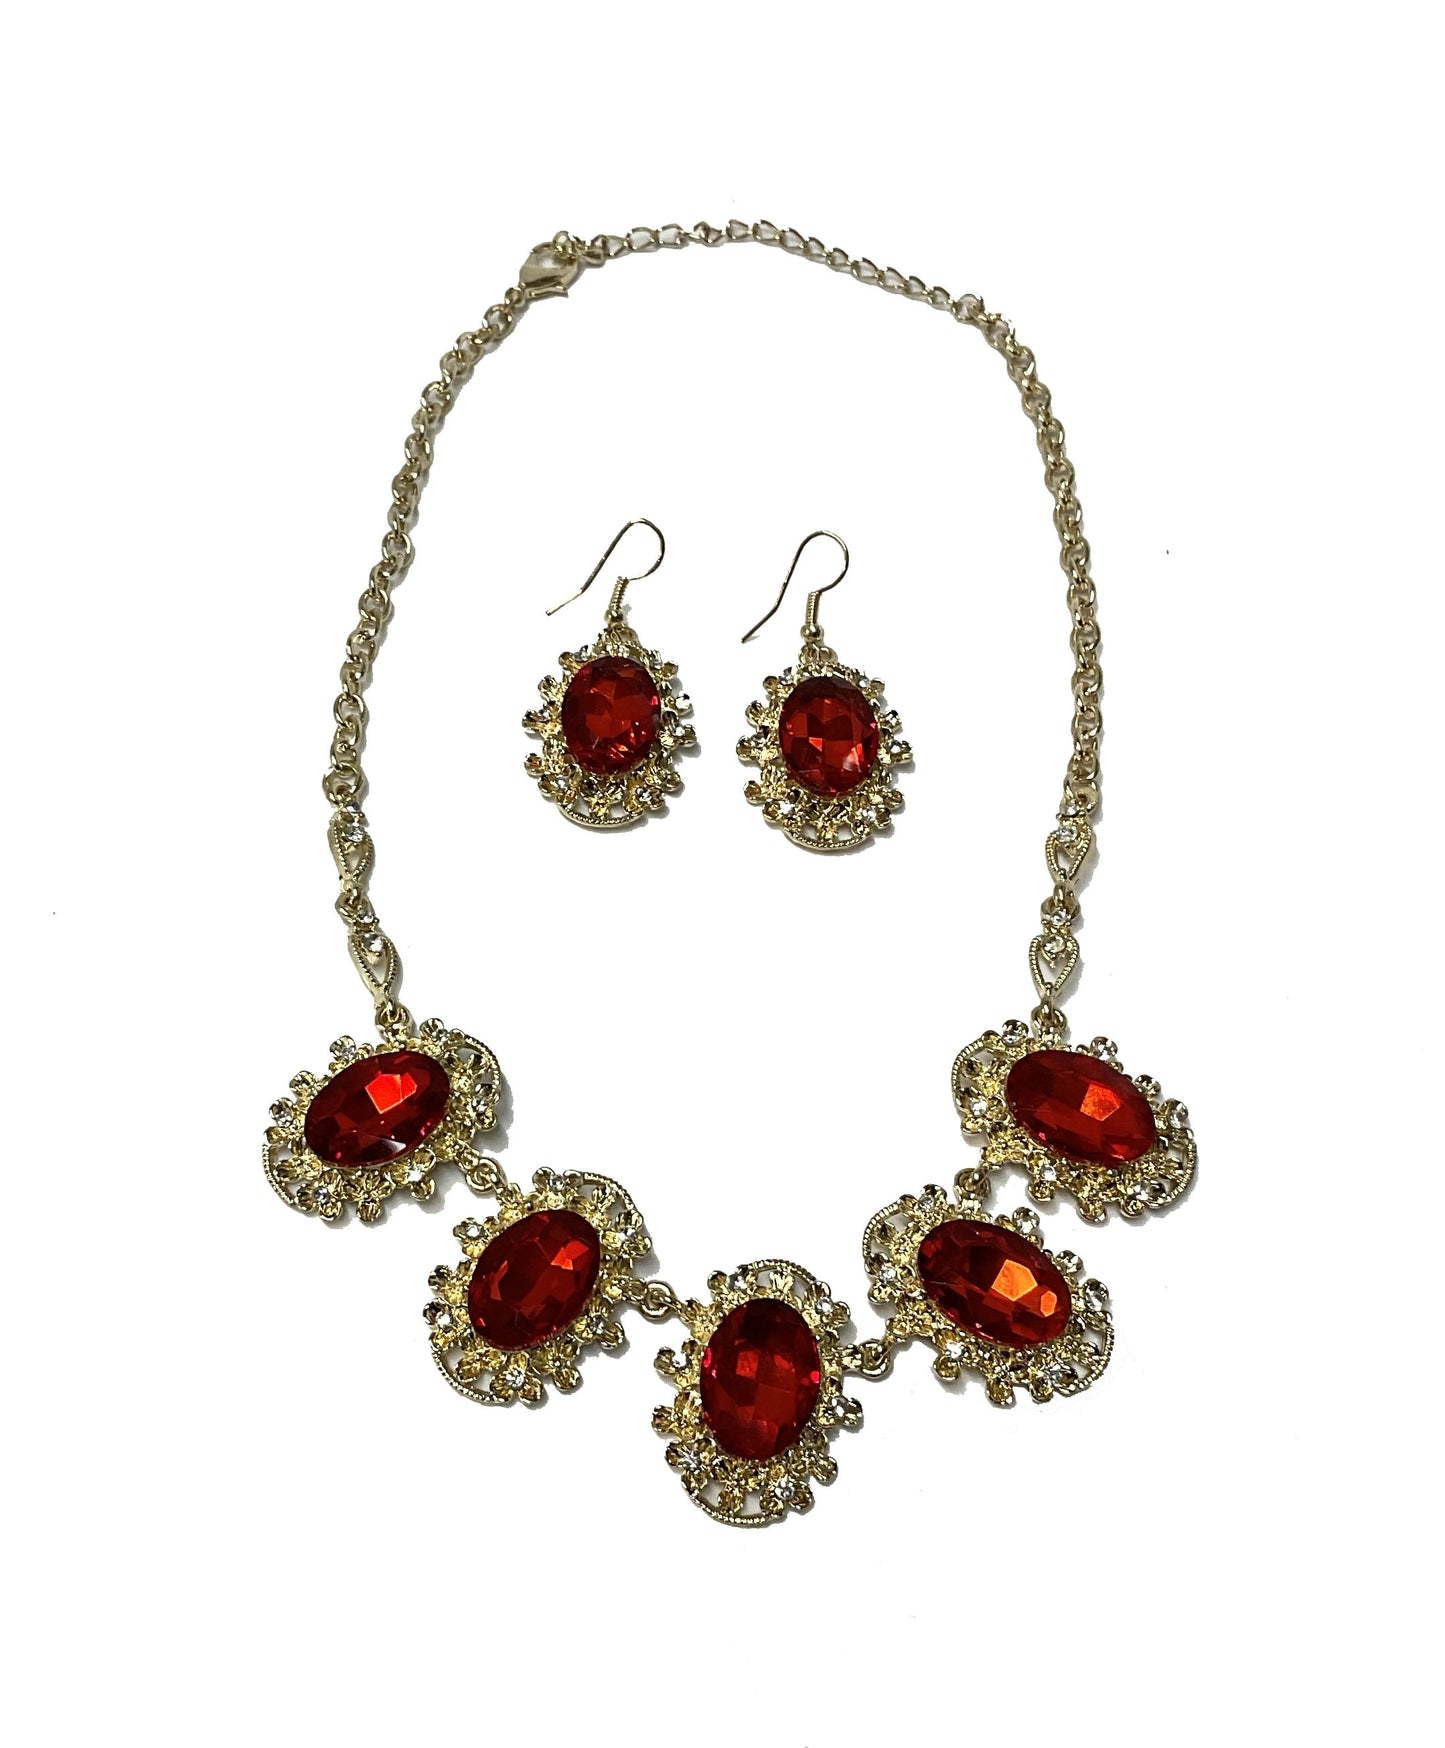 Rhinestone Necklace and Earrings Set #28-11224RD